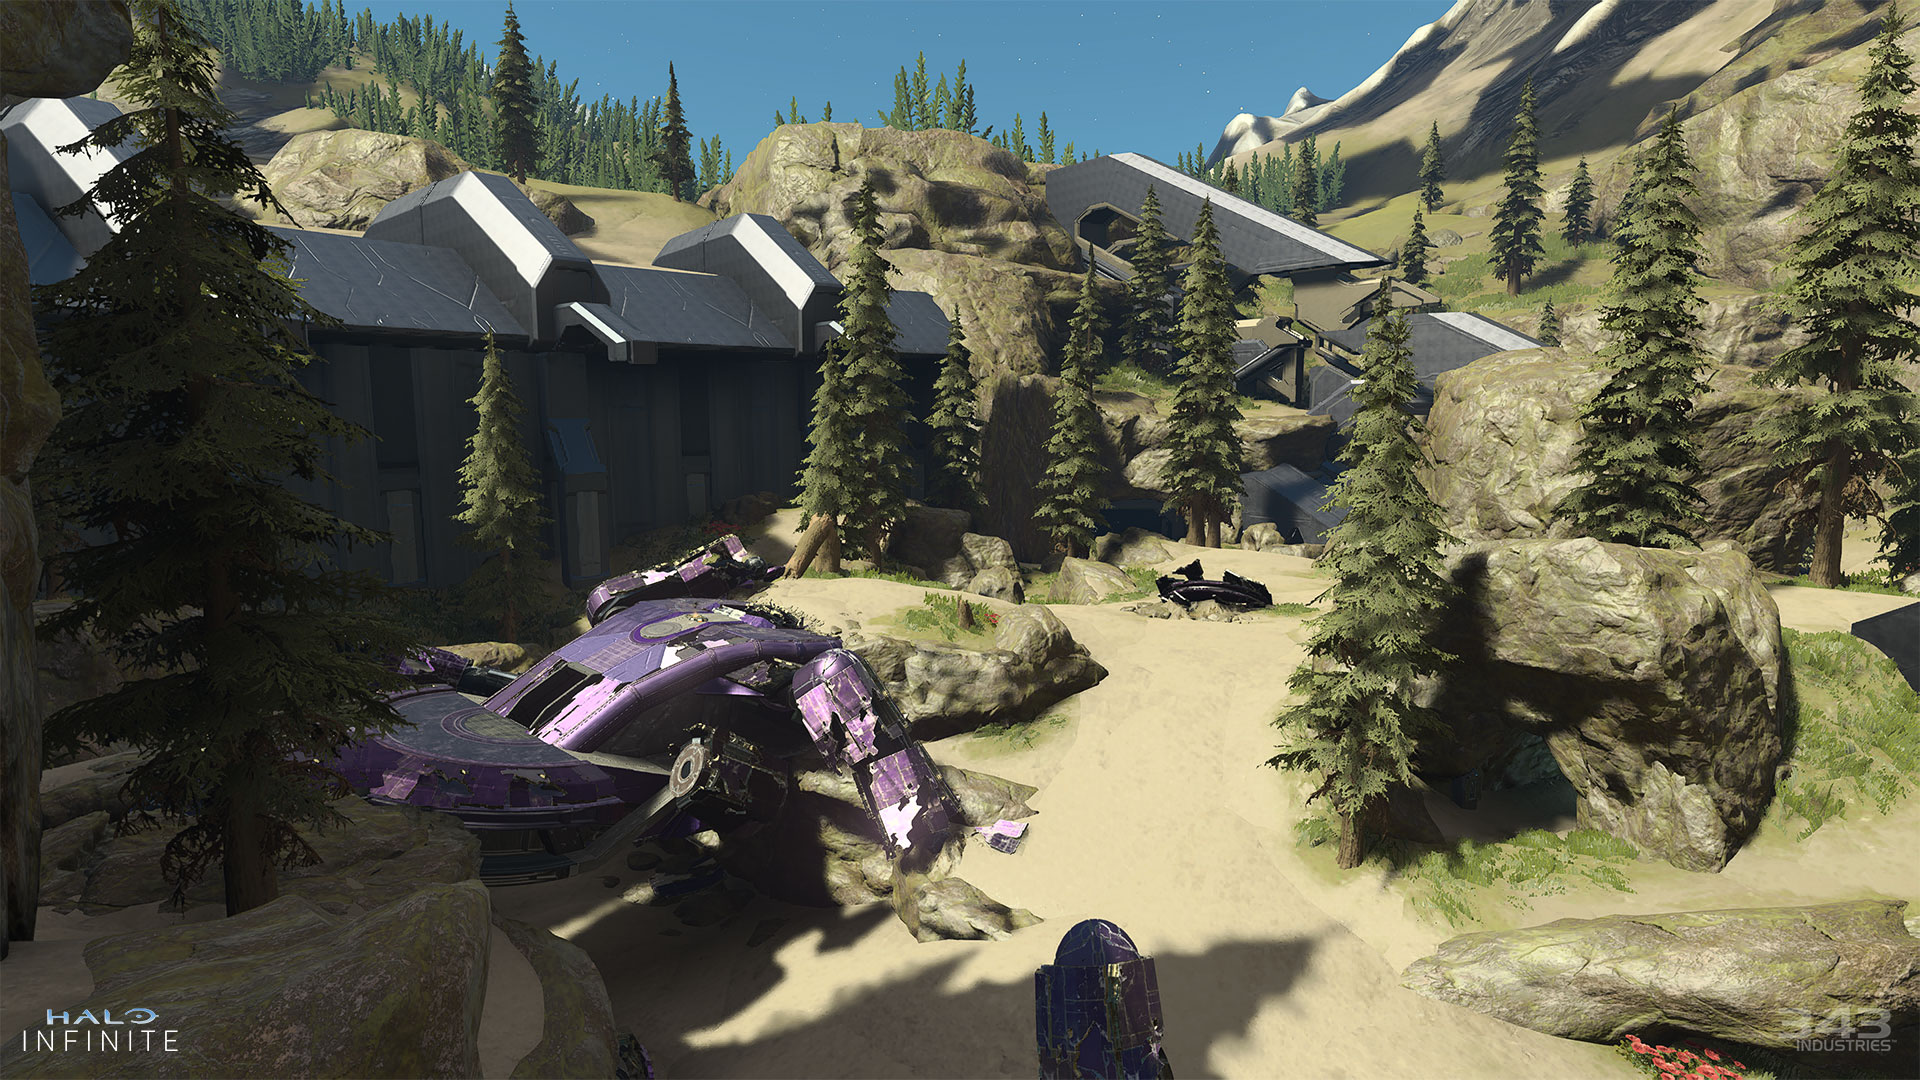 Insolence, made in Halo Infinite Forge